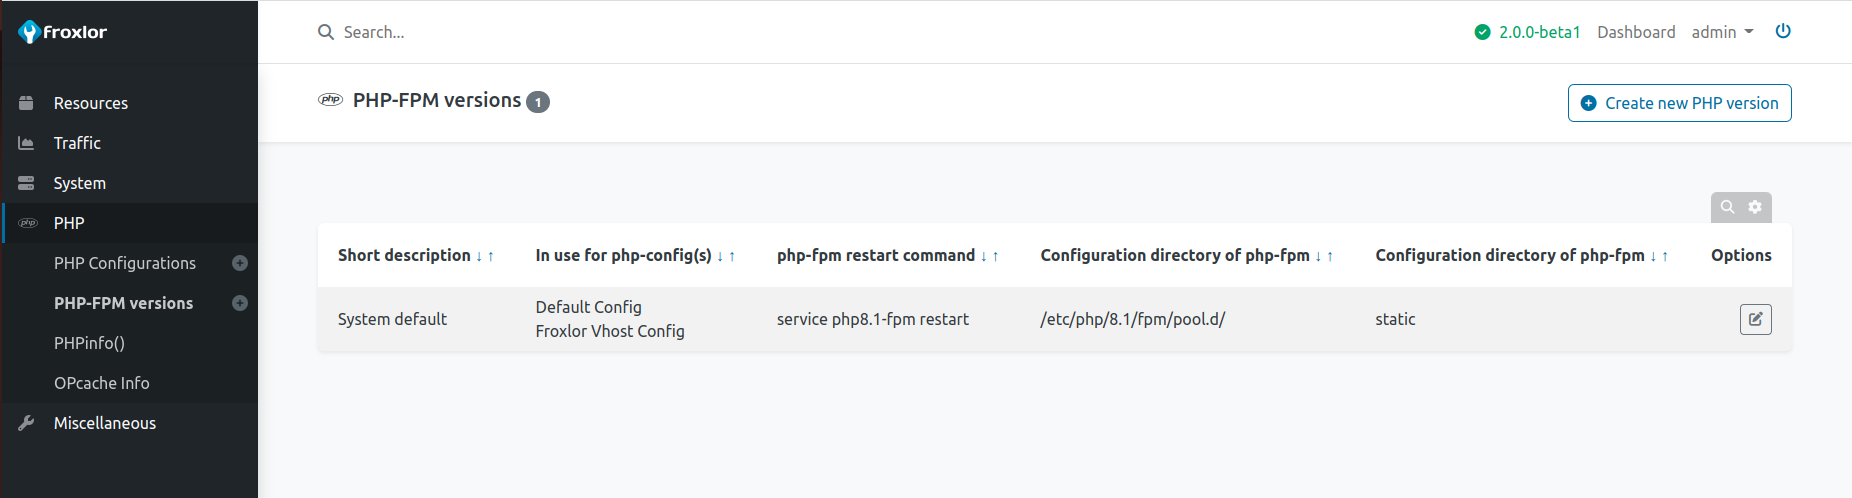 Manage different PHP versions